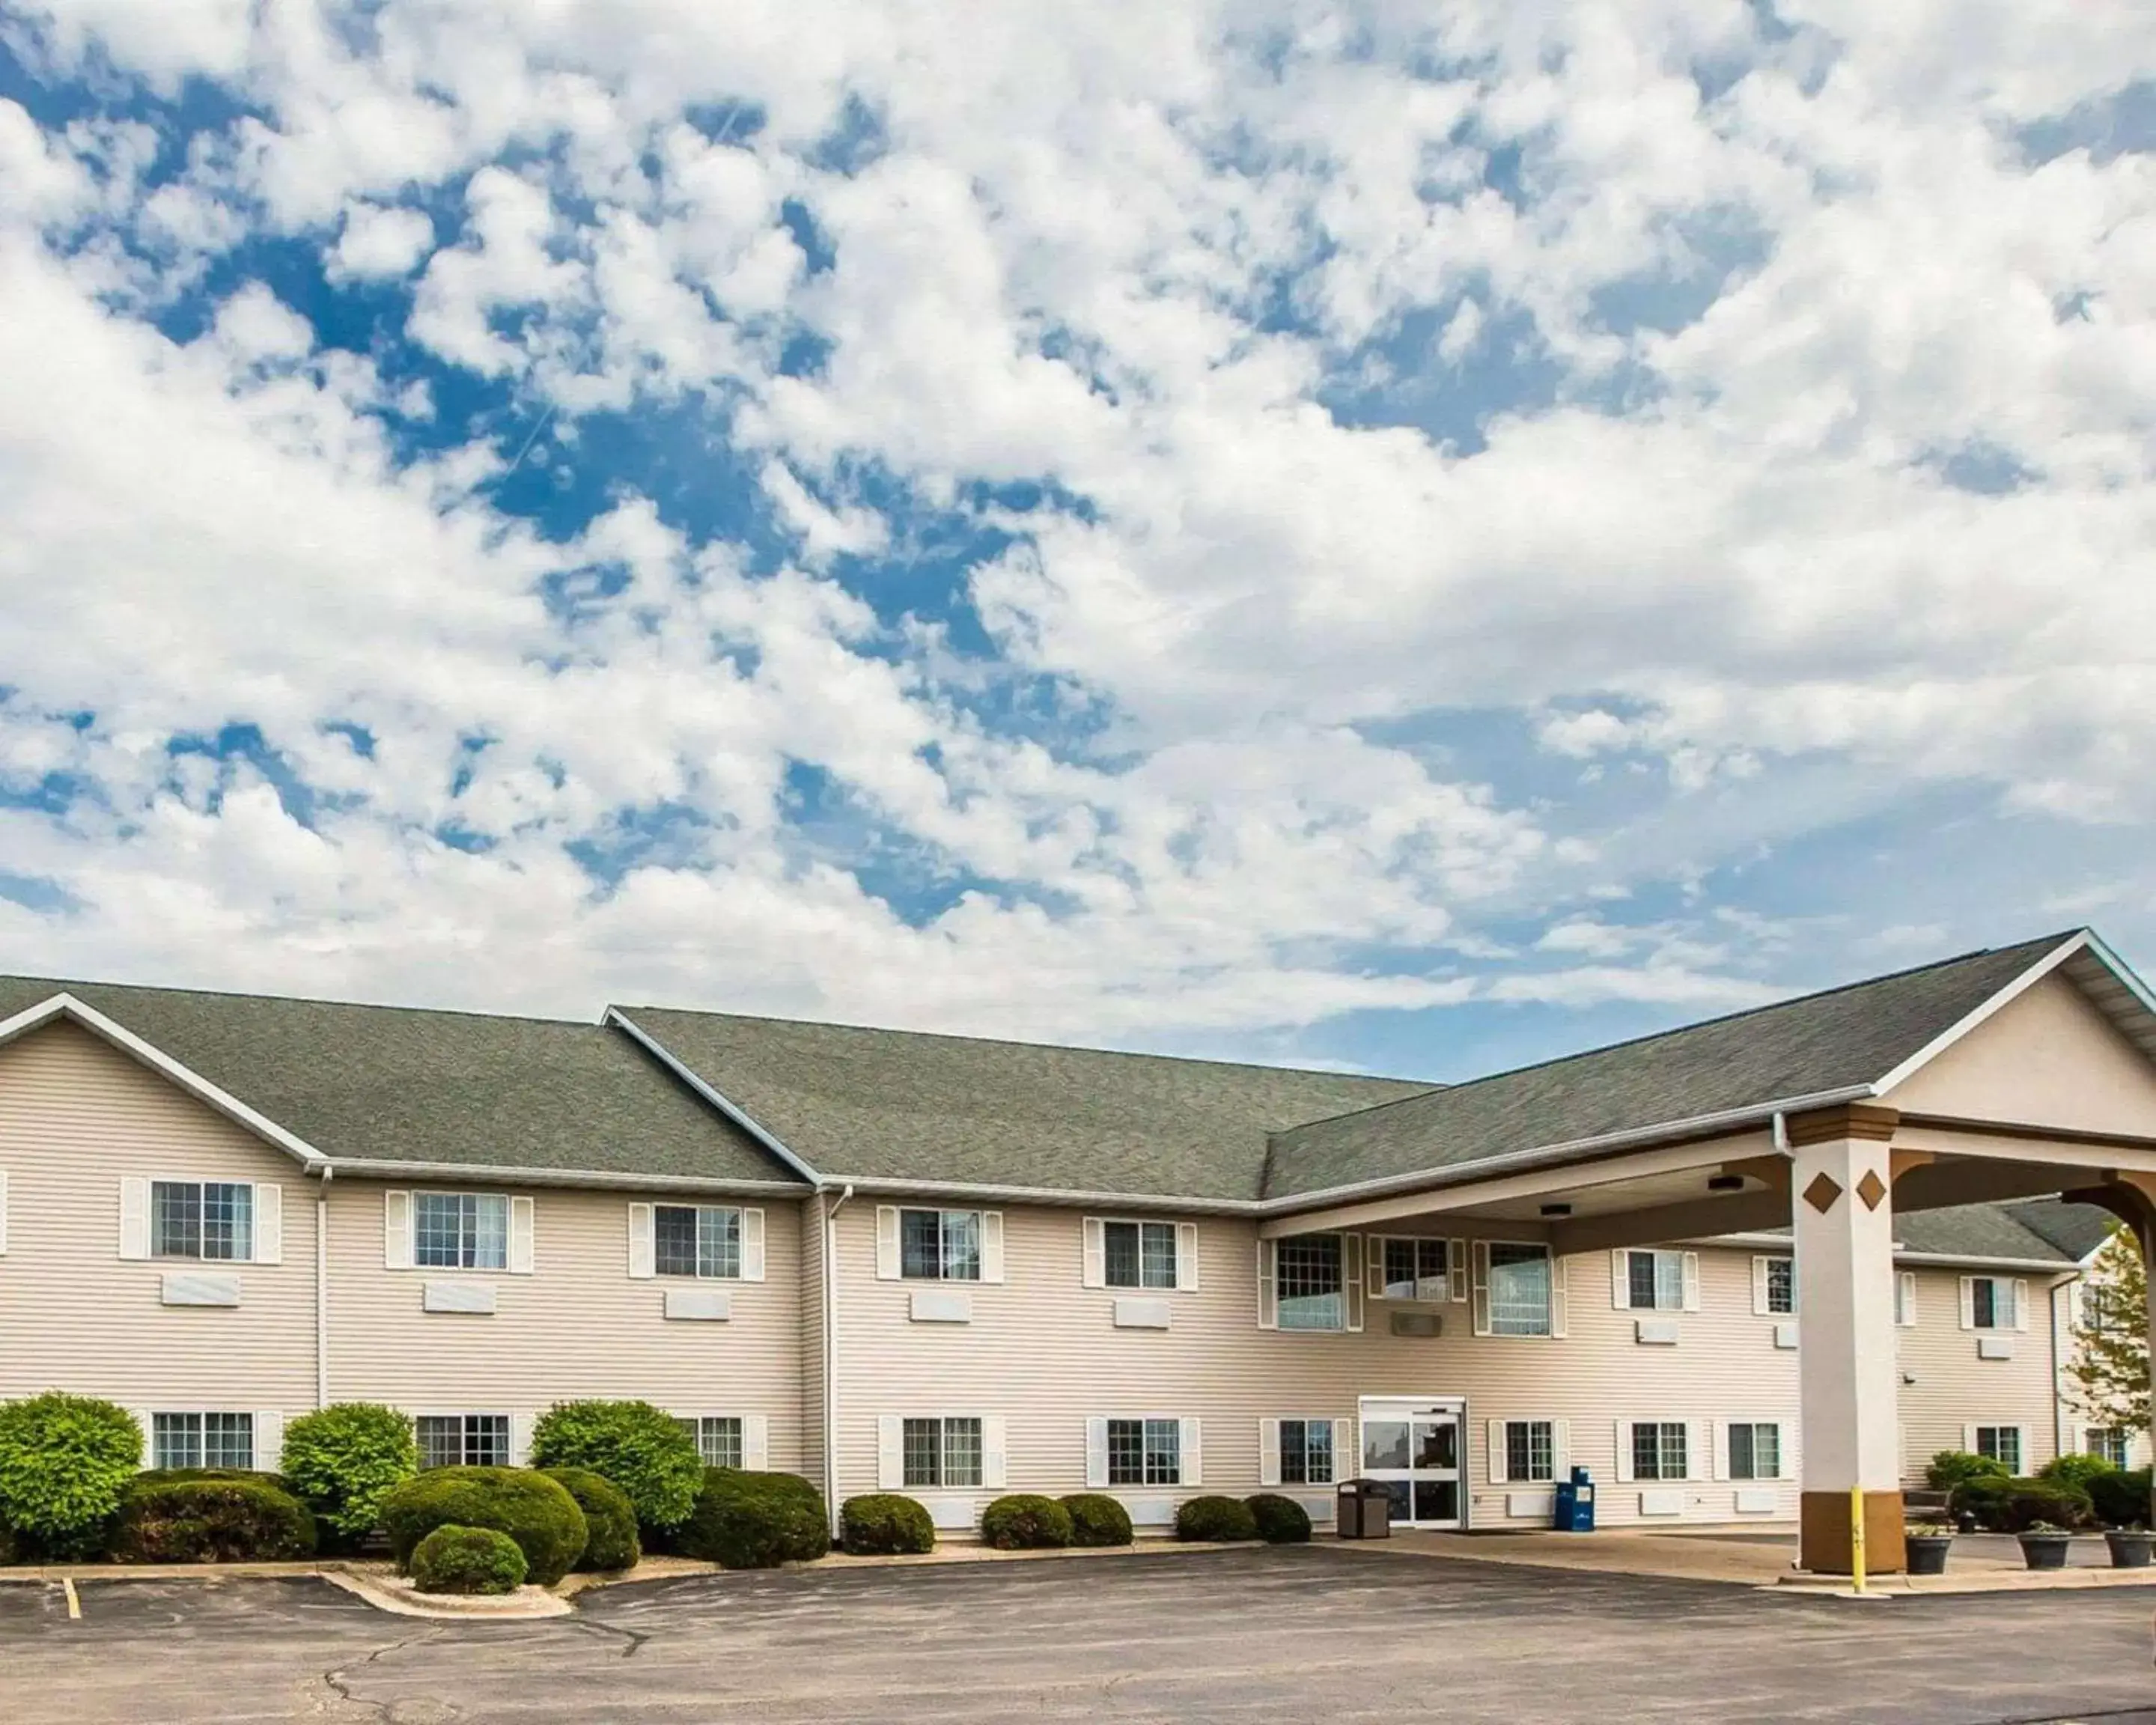 Property Building in Quality Inn & Suites Dixon near I-88